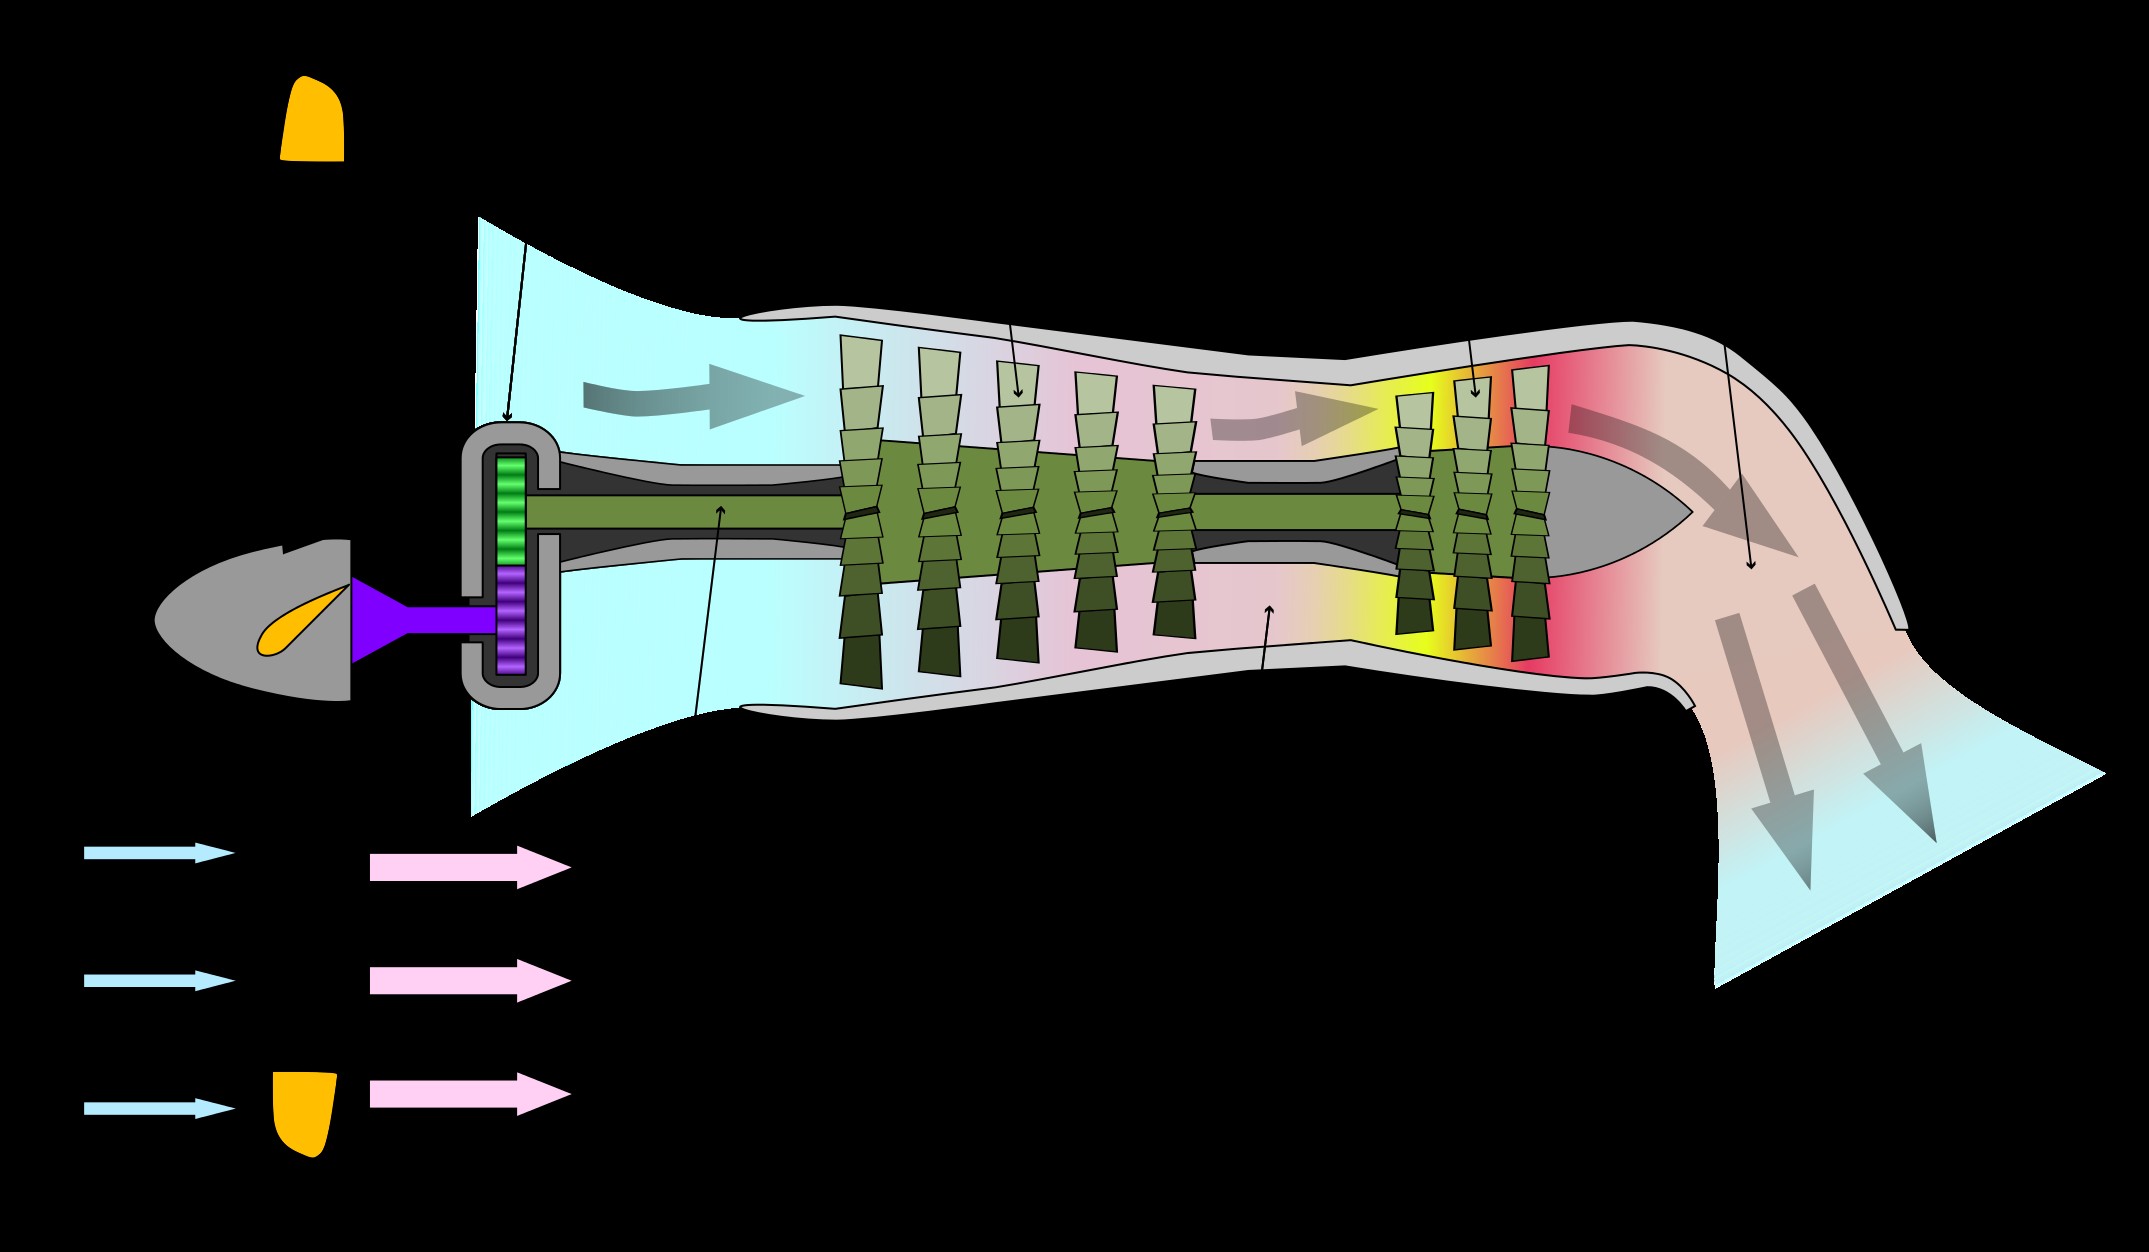 Turboprop Engine Diagram Turboprop is It Possible to Drive A Prop Directly From A Jet Of Turboprop Engine Diagram